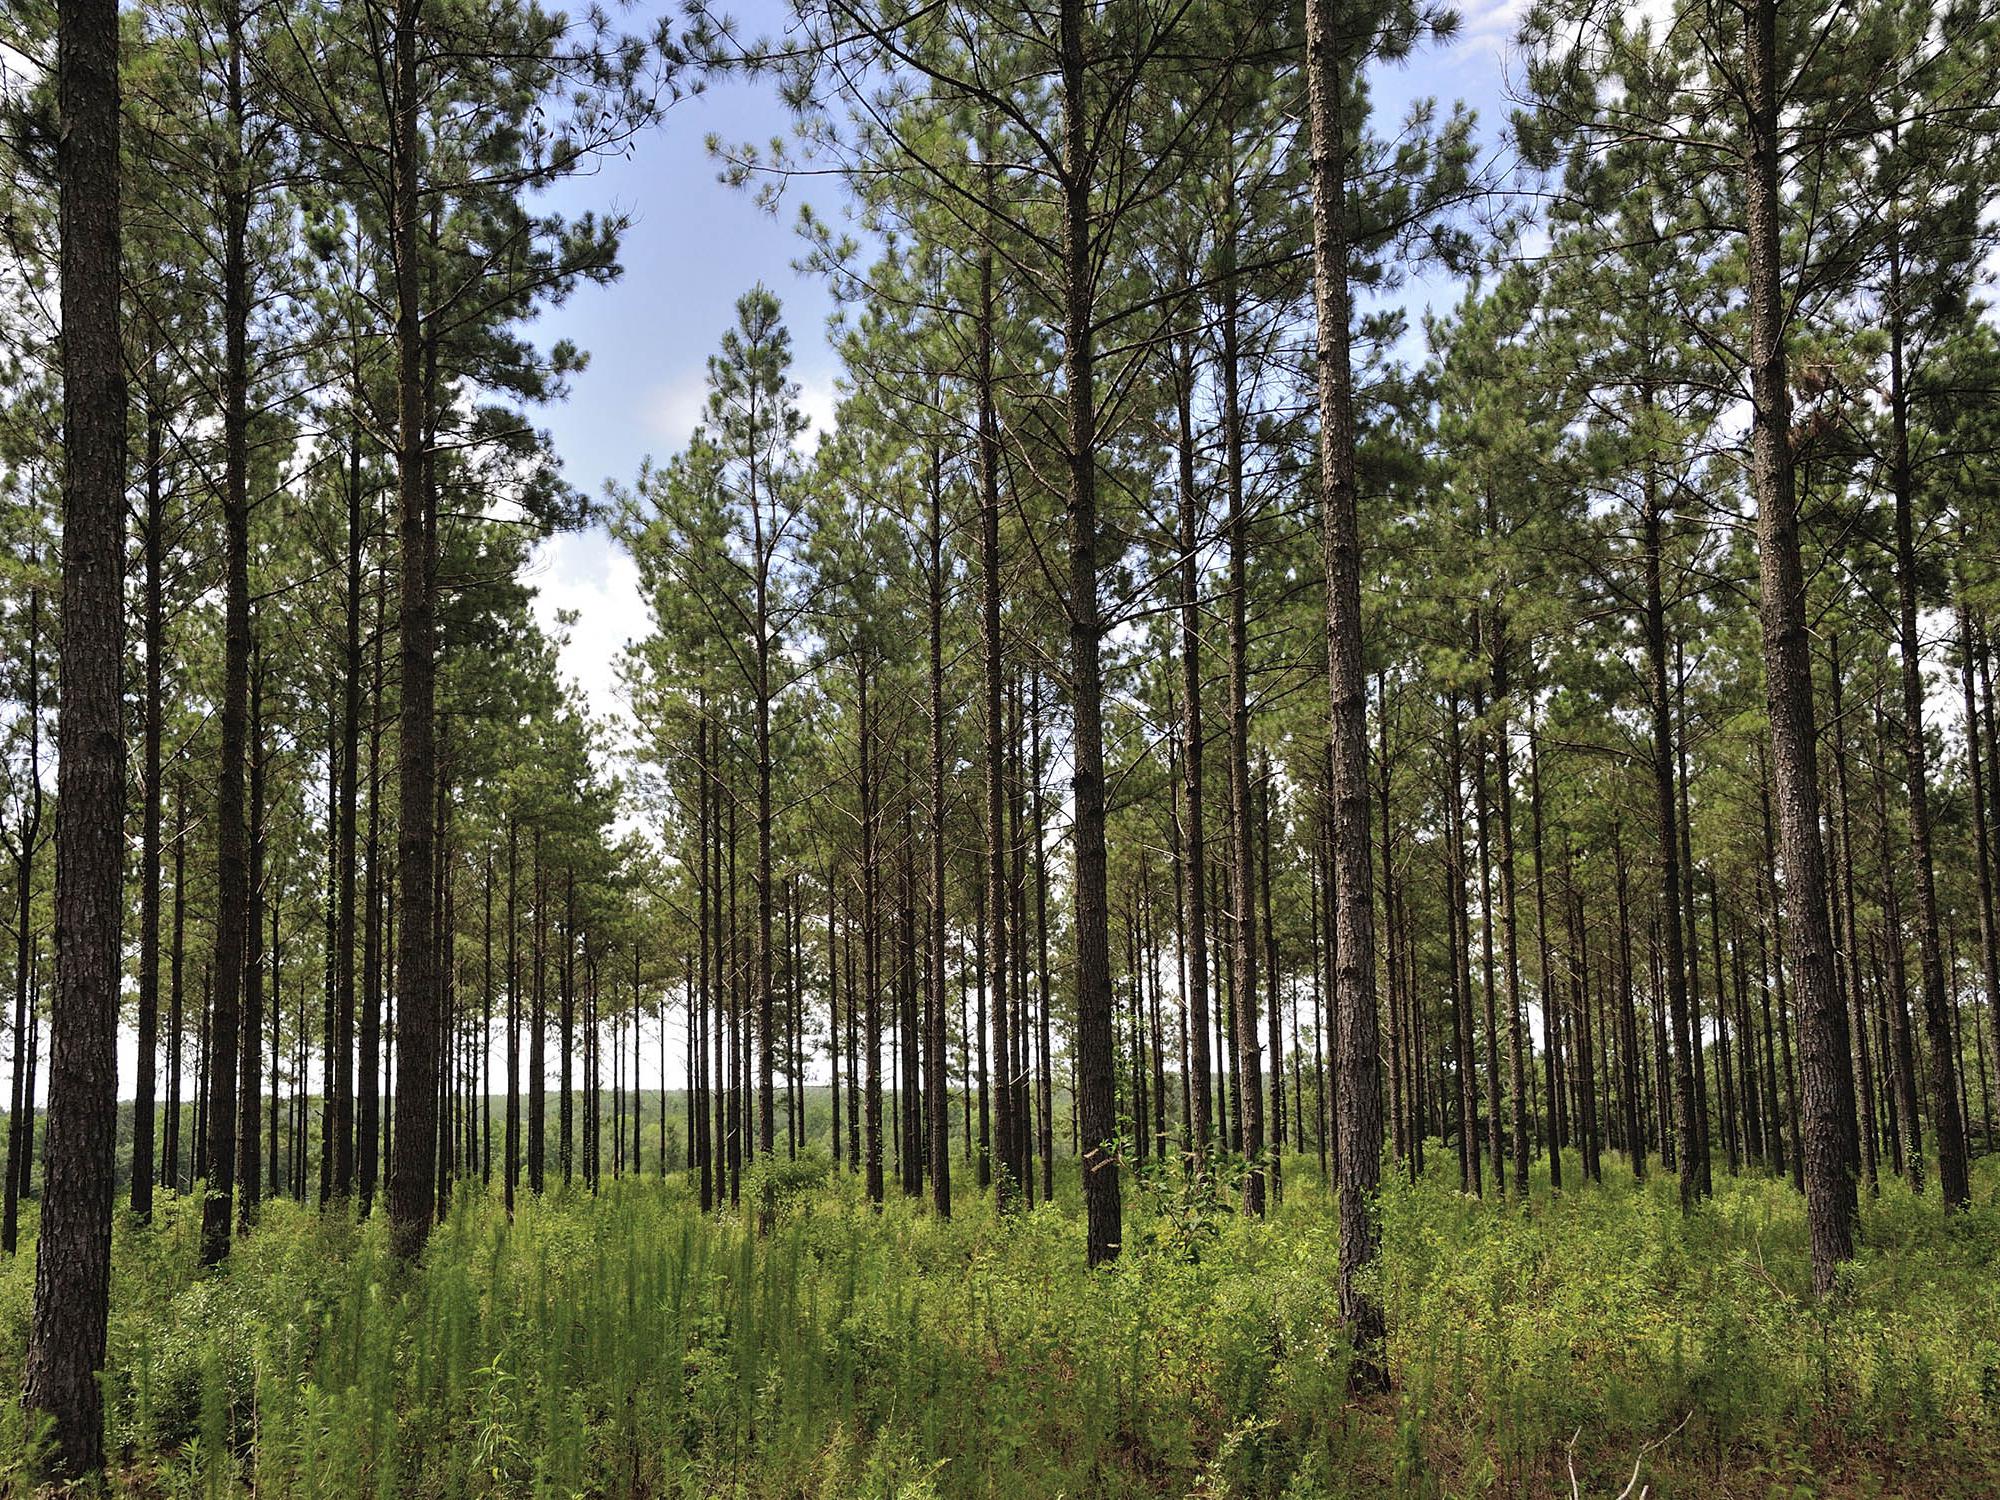 This forest has hundreds of tall, thin pine trees with light-gray bark and green clumps of needles. 